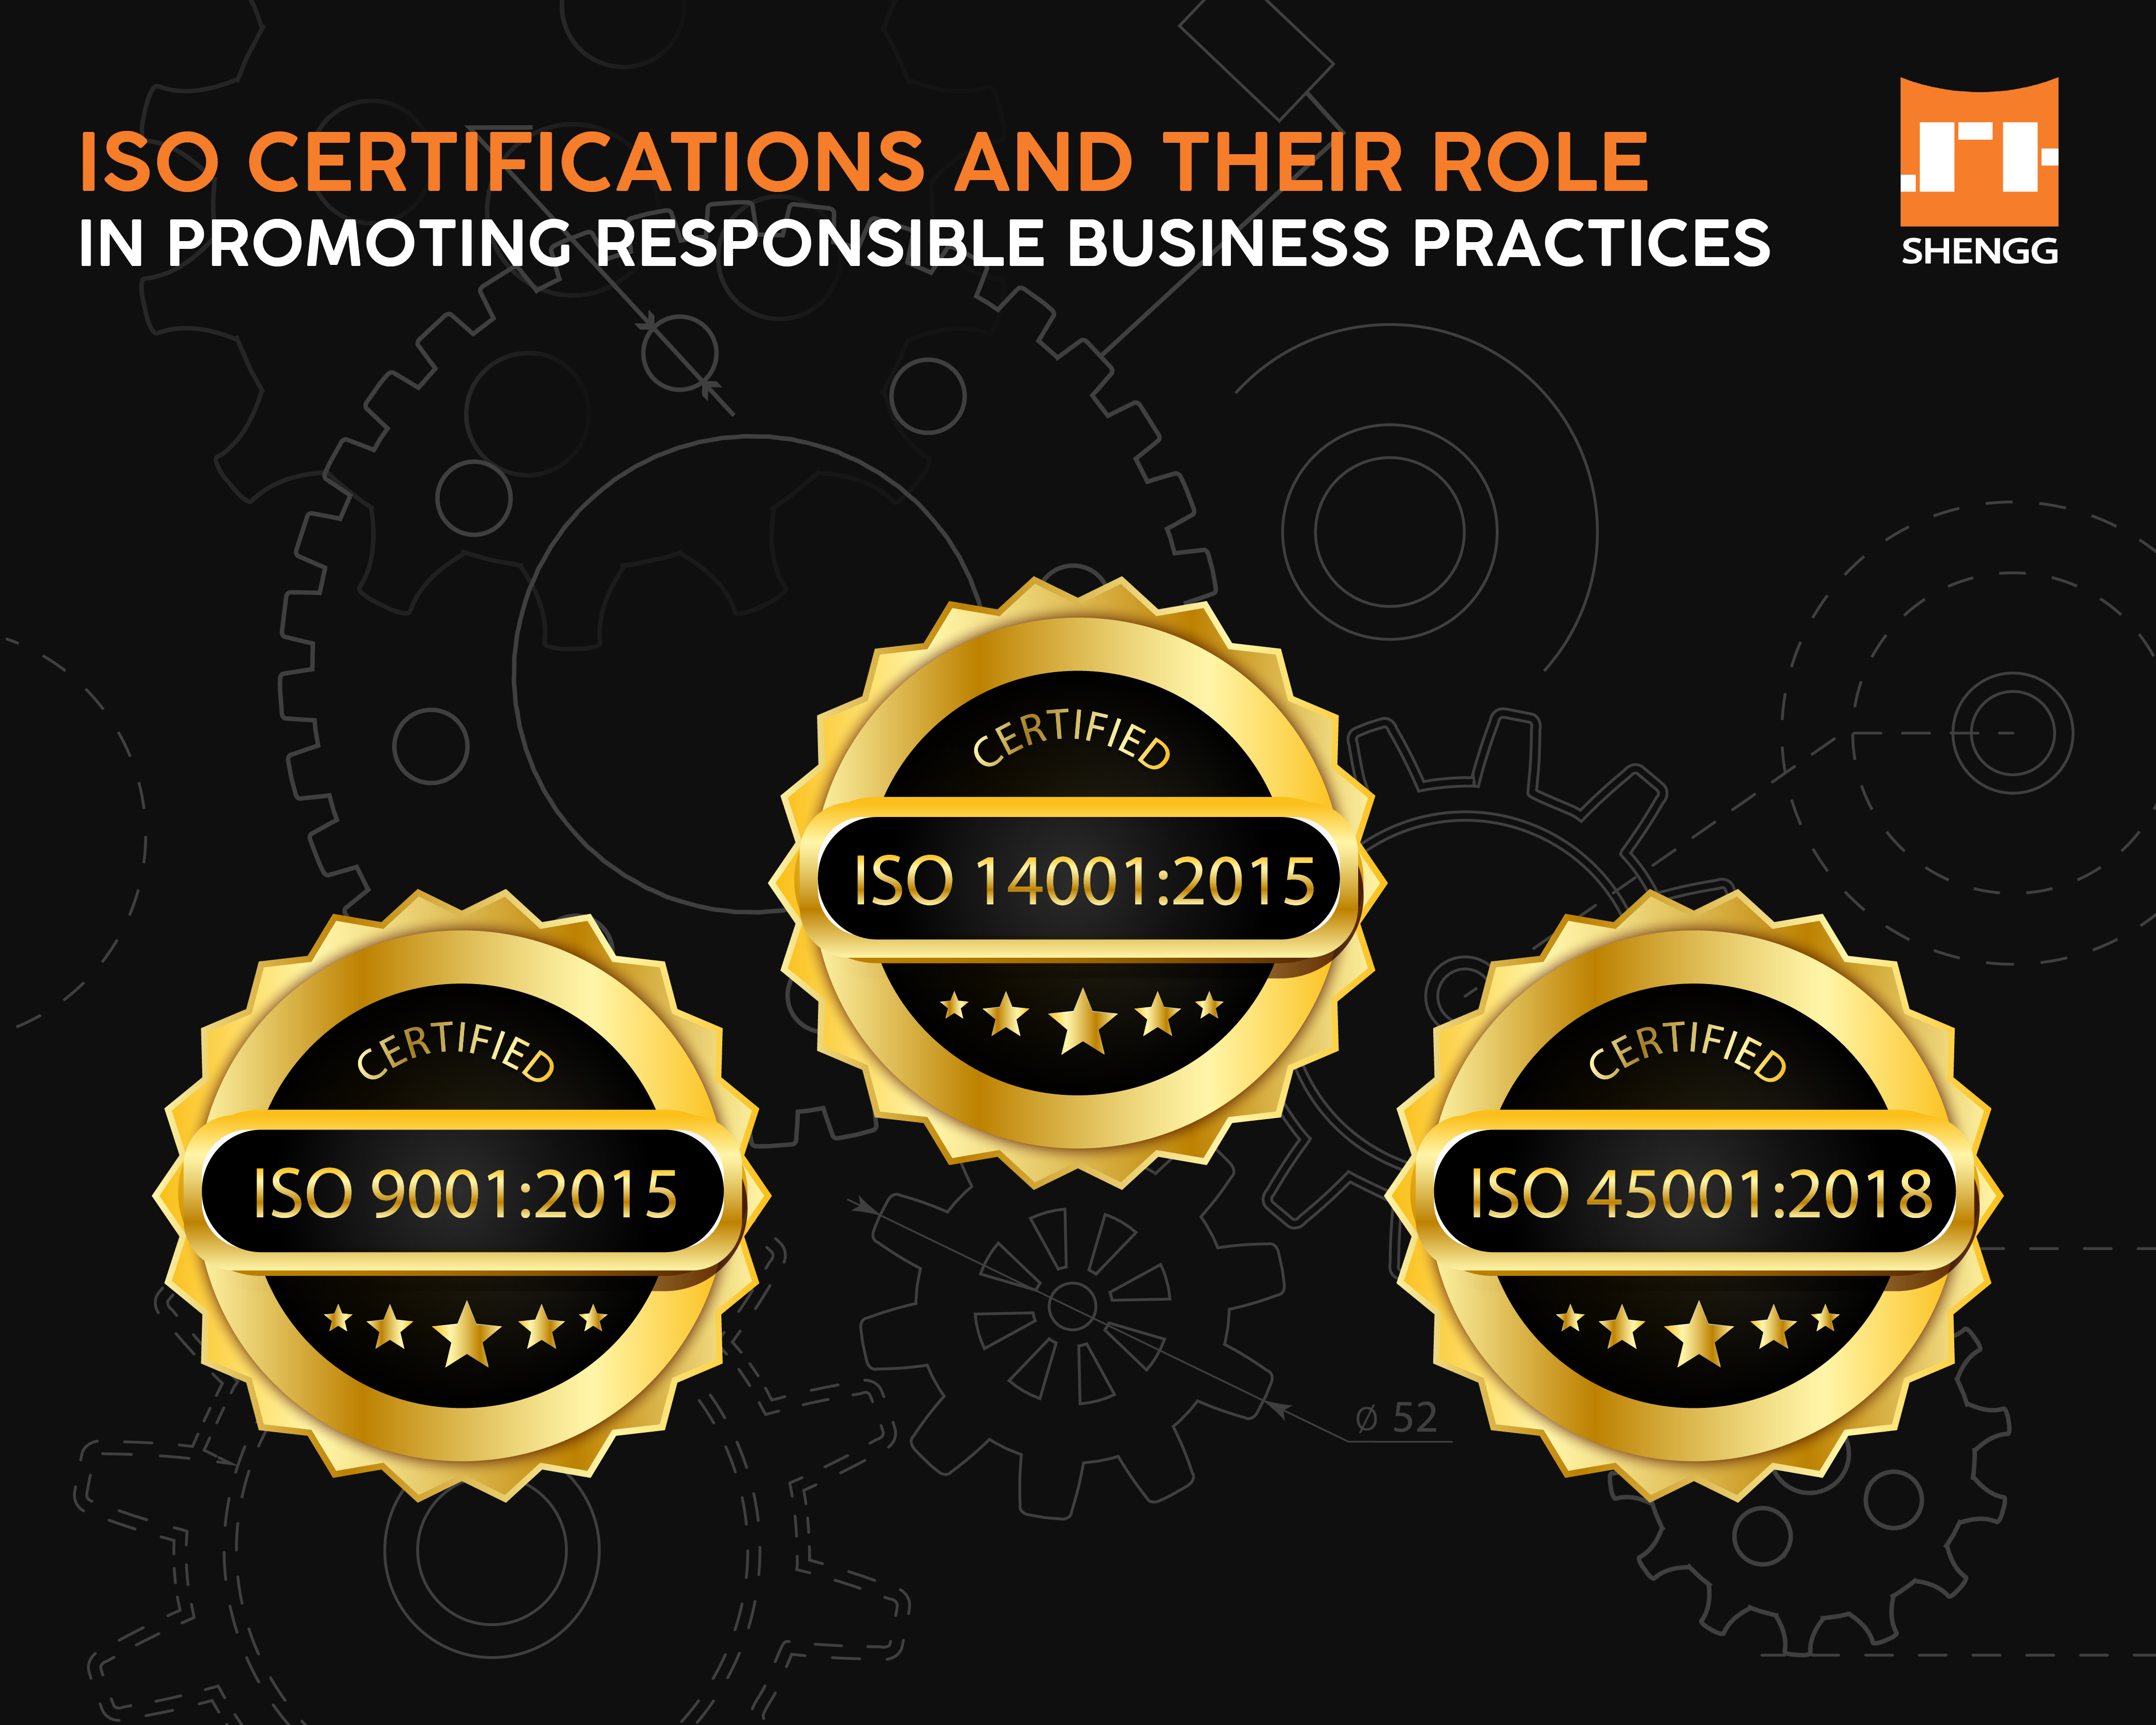 ISO Certifications and their Role in Promoting Responsible Business Practices